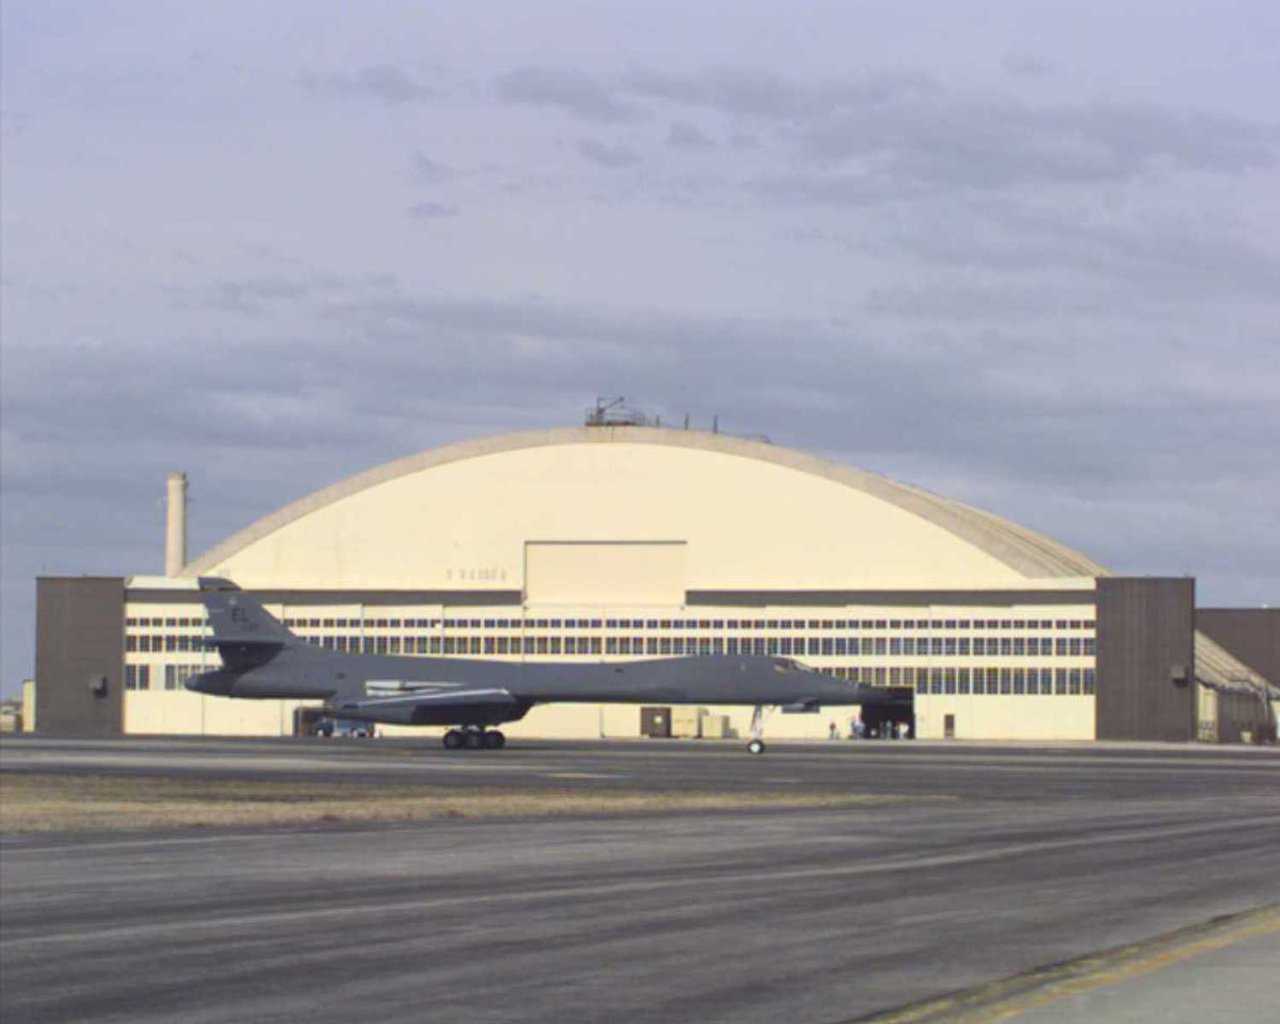 Ellsworth AFB PRIDE Aircarft Hangar—Rapid City, South Dakota — Ellsworth AFB’s exterior appearance is historic, a reminder of the early cold war era and a period of significant growth for this base.